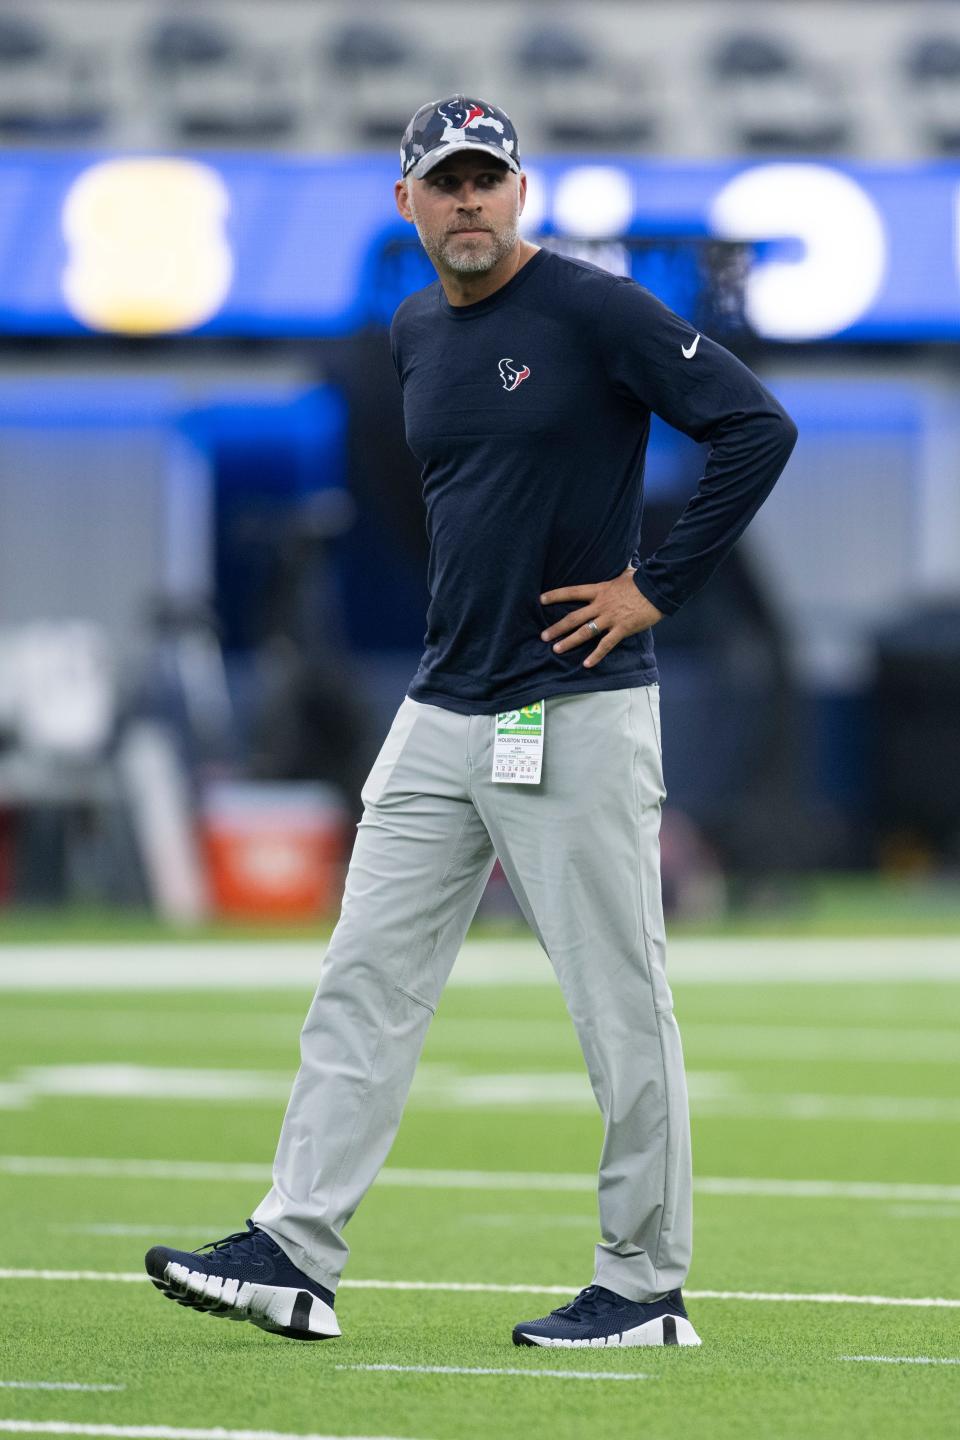 Houston Texans wide receivers coach Ben McDaniels watches his players before a preseason game against the Los Angeles Rams Friday, Aug. 19, 2022, in Inglewood, Calif.